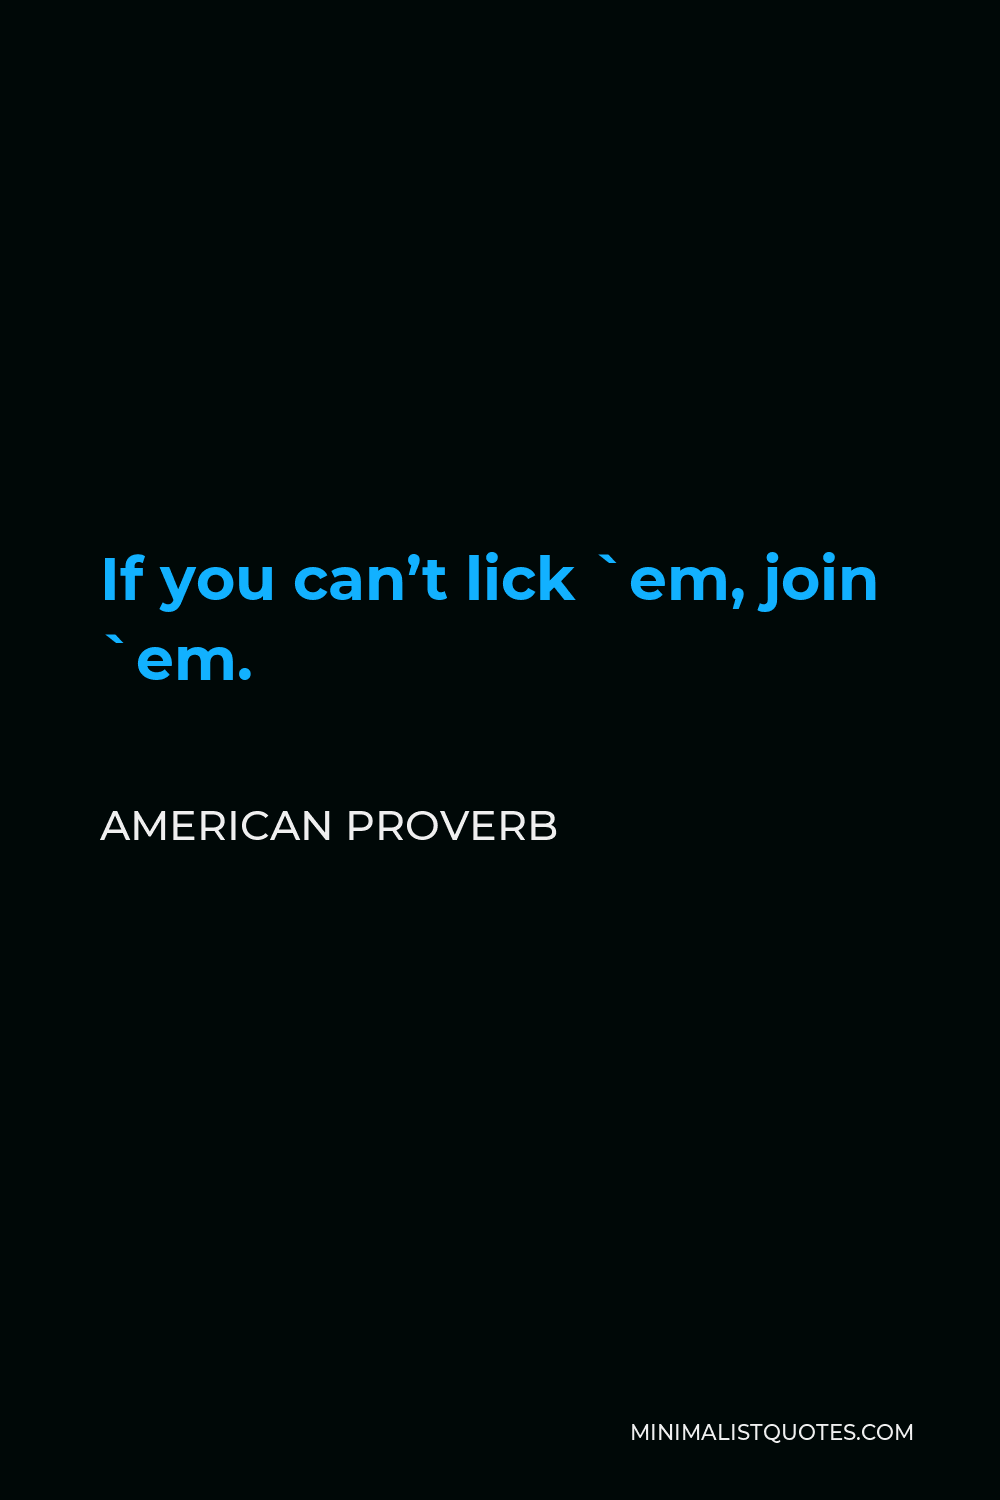 American Proverb Quote - If you can’t lick `em, join `em.